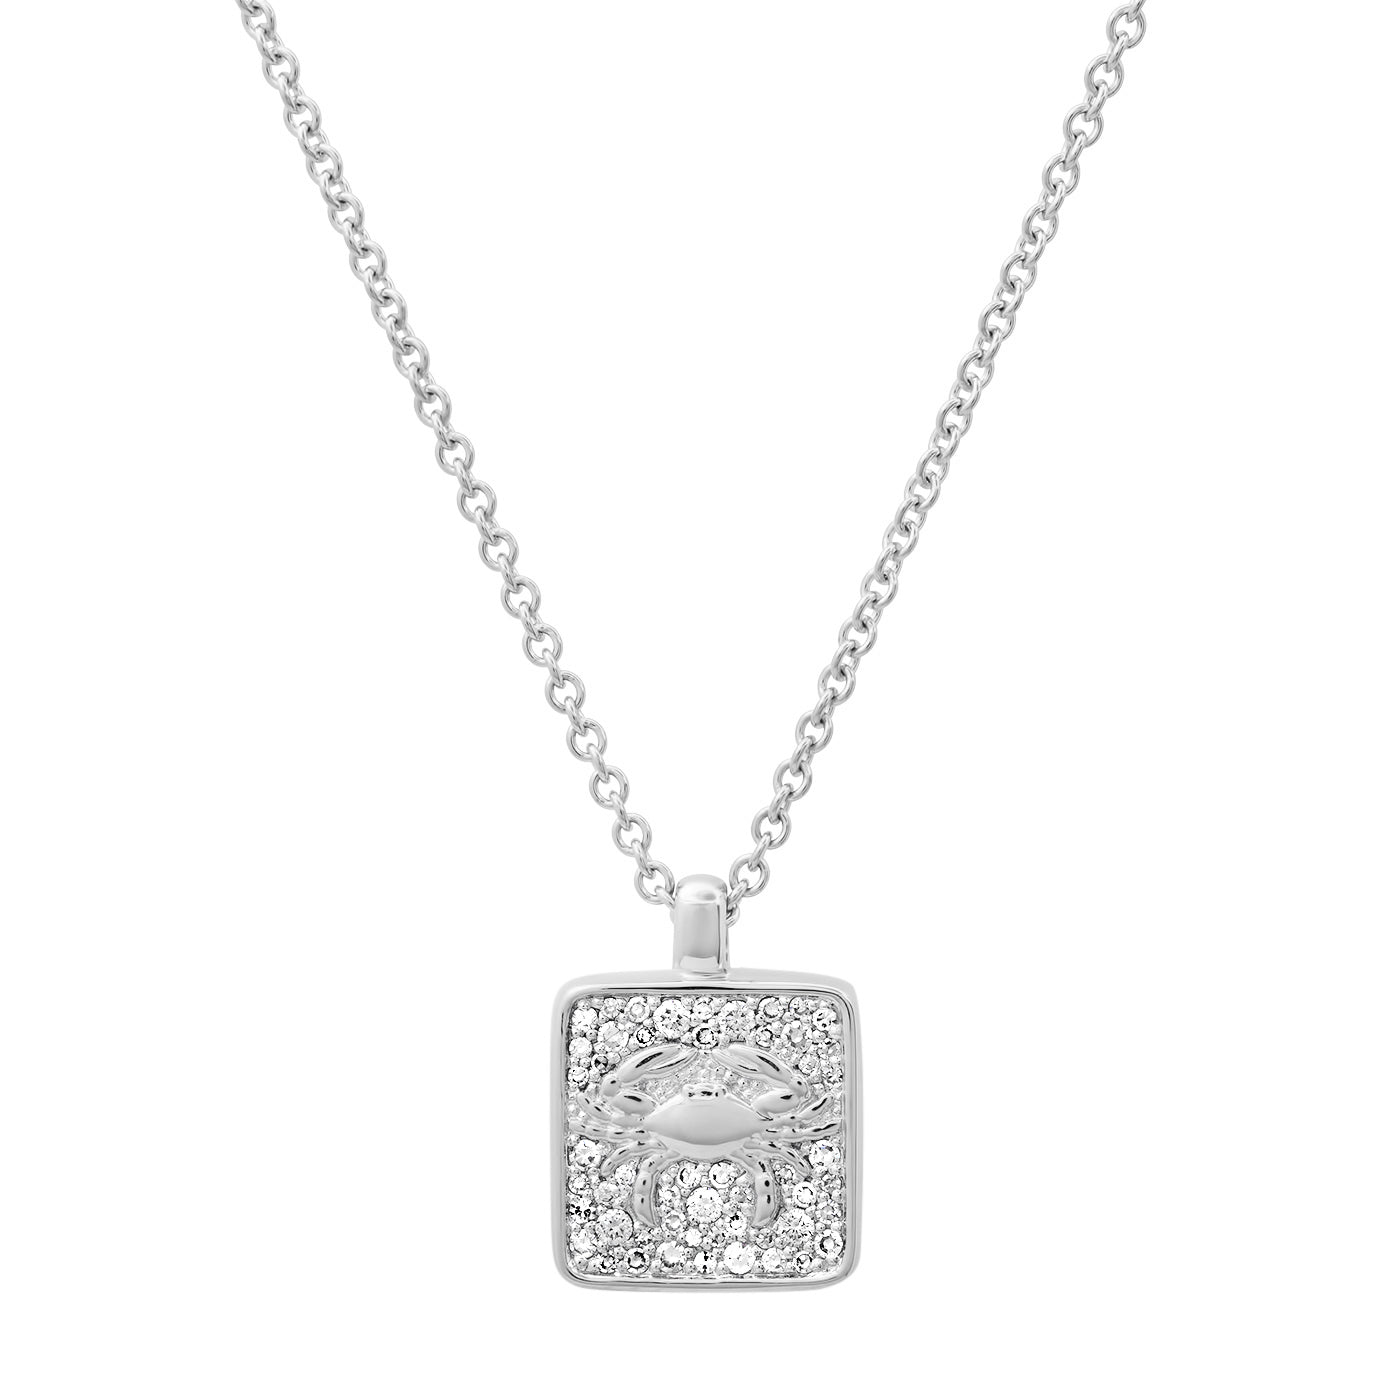 14K White Gold Cancer Necklace